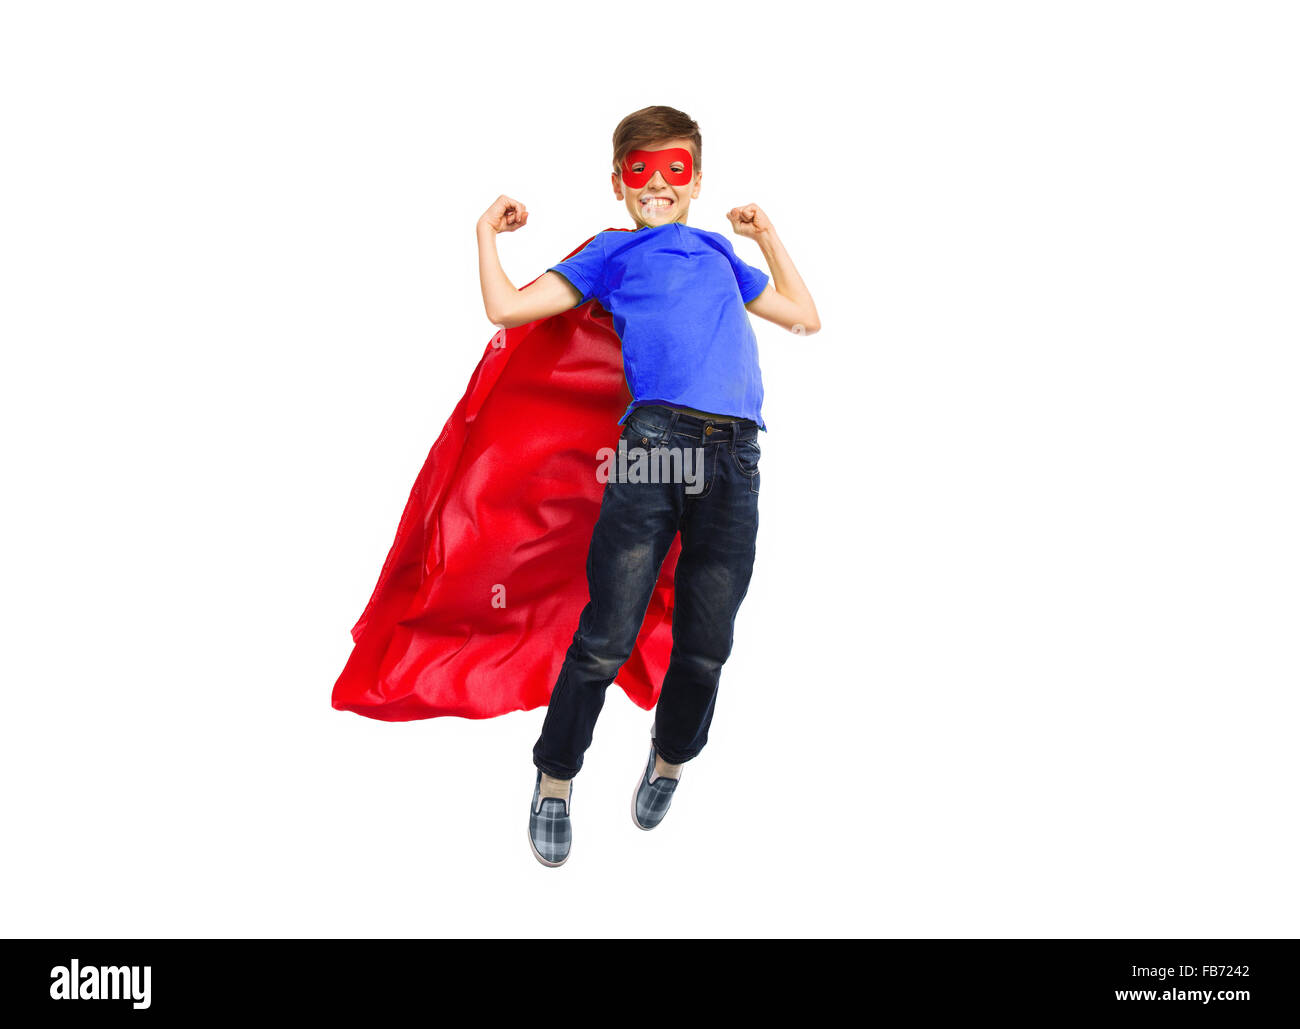 boy in red super hero cape and mask flying on air Stock Photo